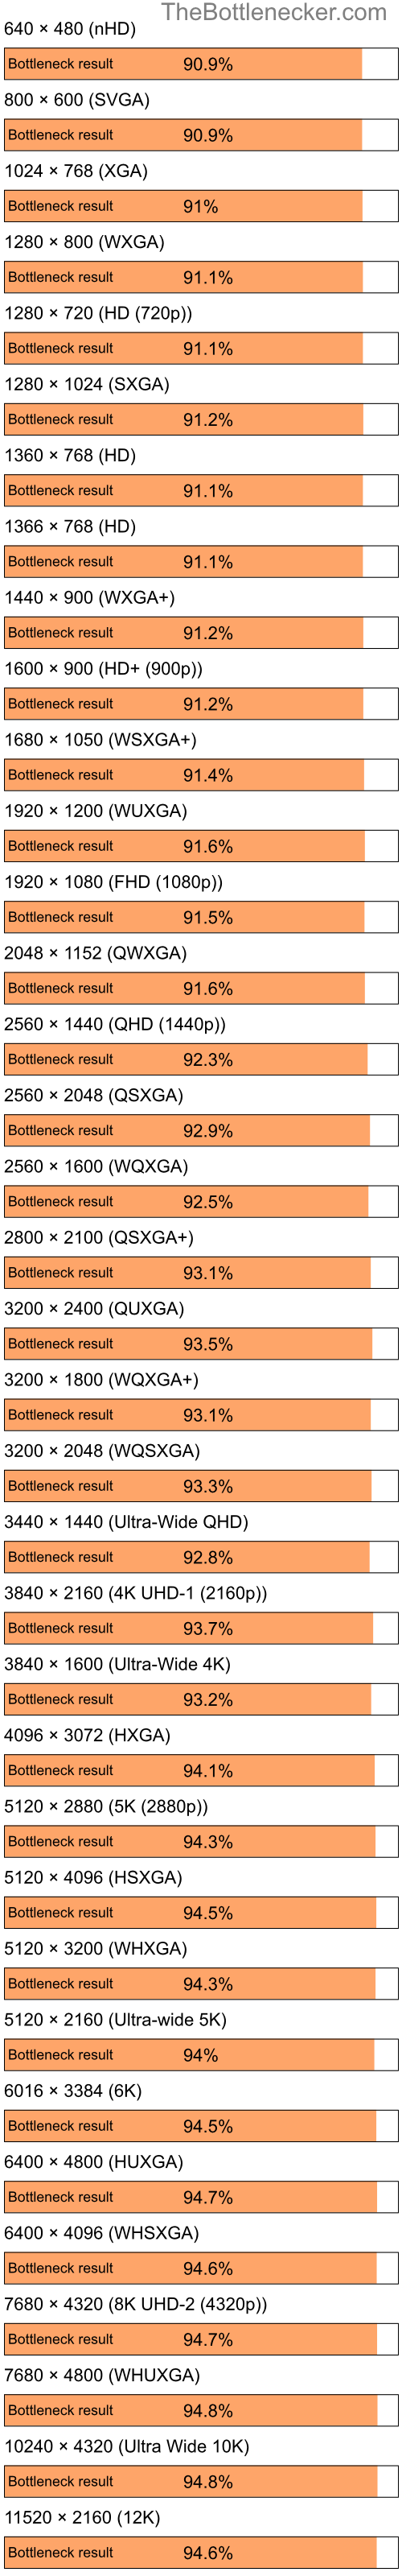 Bottleneck results by resolution for Intel Celeron M and NVIDIA GeForce4 Ti 4200 in Graphic Card Intense Tasks